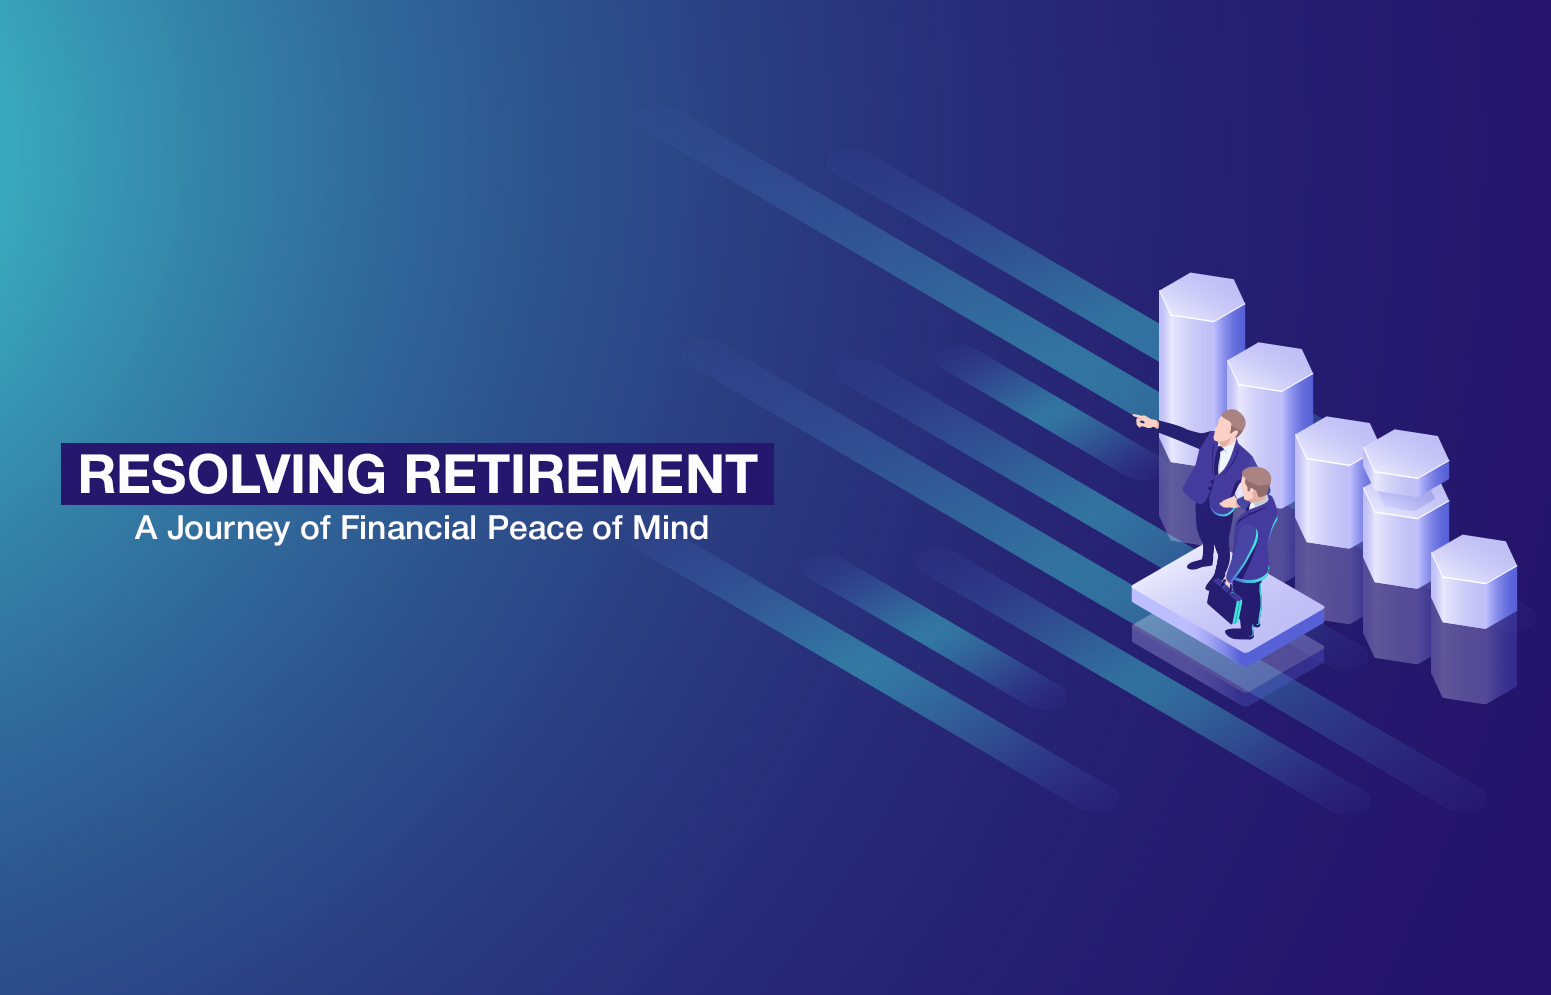 Resolving Retirement: A Journey of Financial Peace of Mind